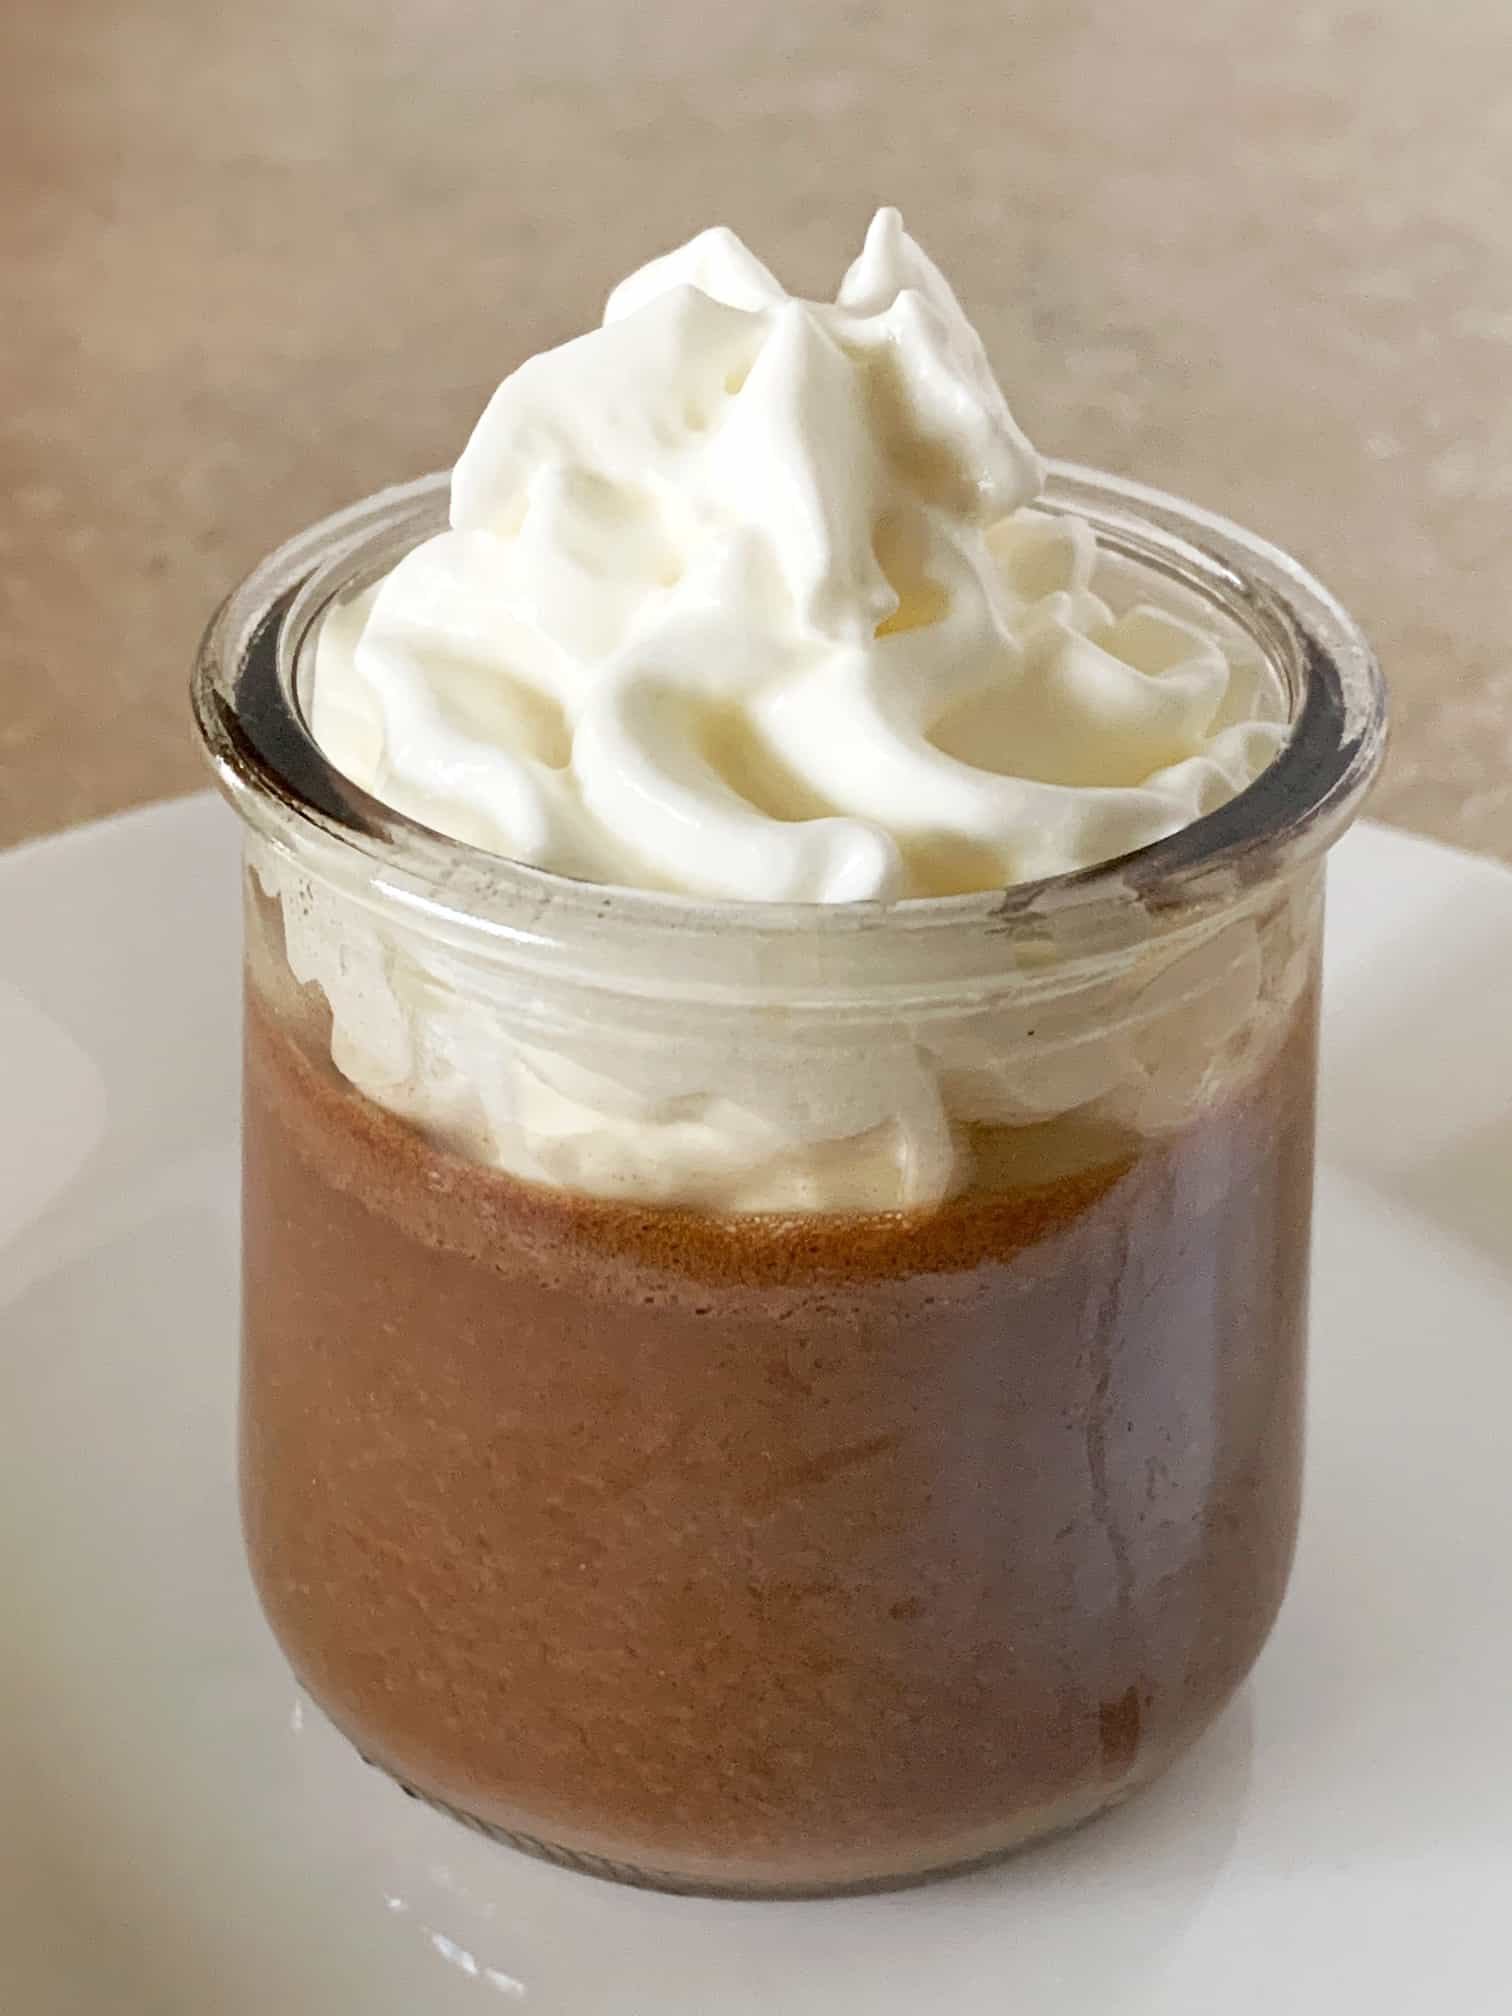 Pots de Creme topped with whipped cream in a glass jar